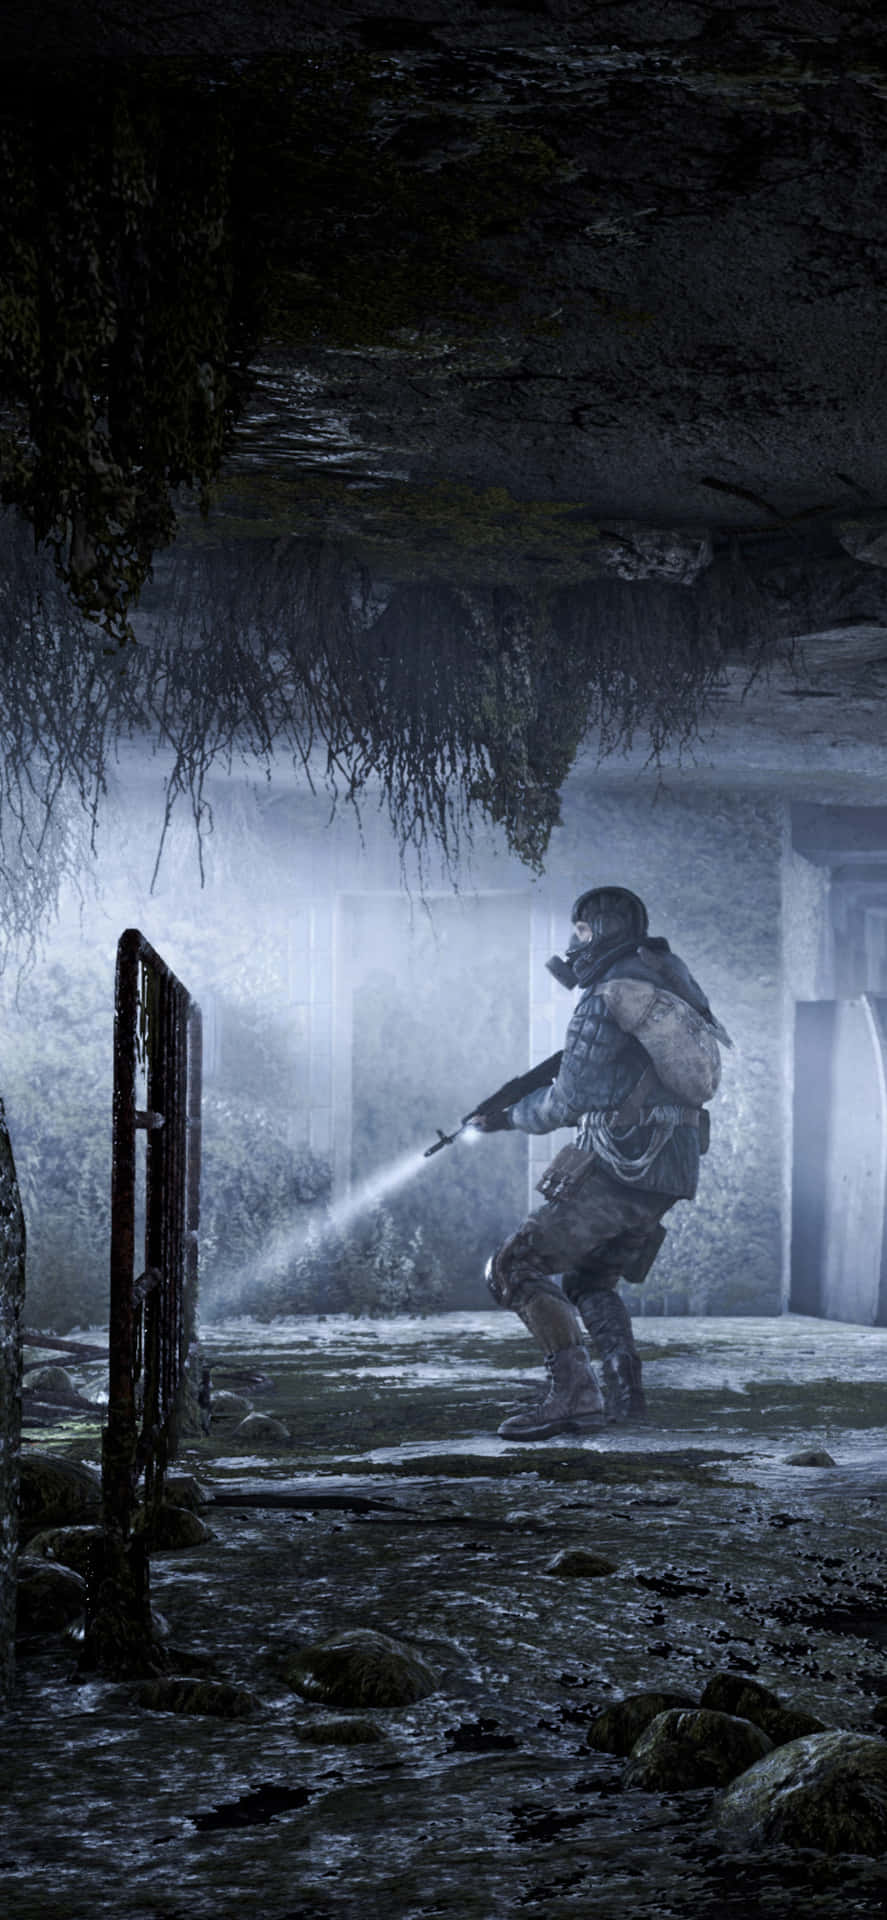 Android Metro Last Light – an immersive survival shooter game.